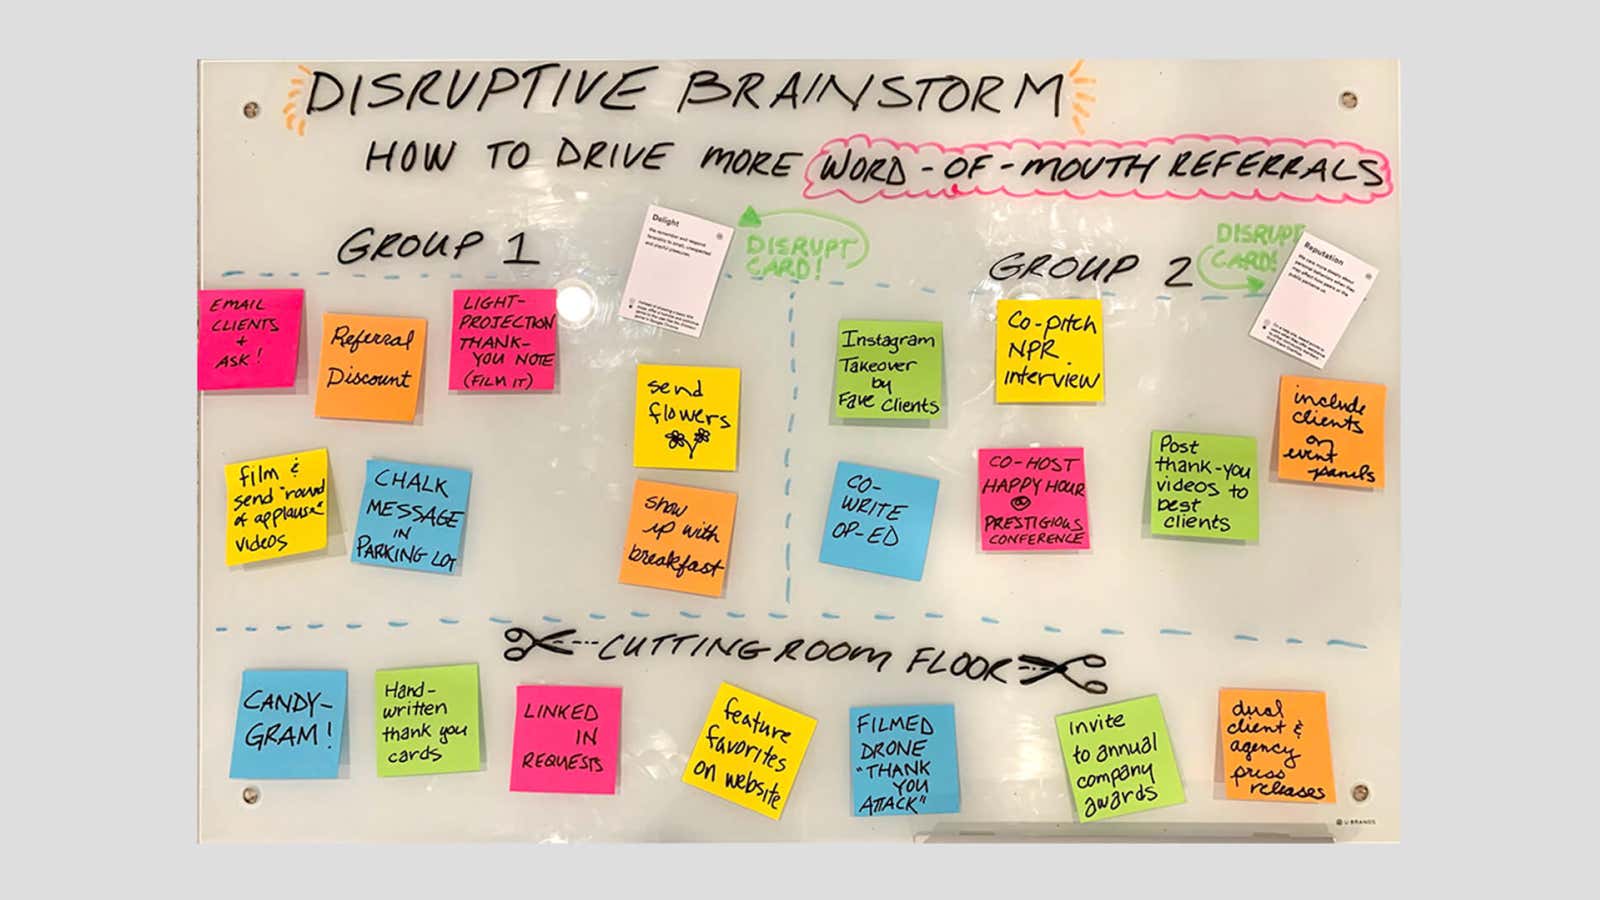 These creative thinking exercises can disrupt your next team brainstorm